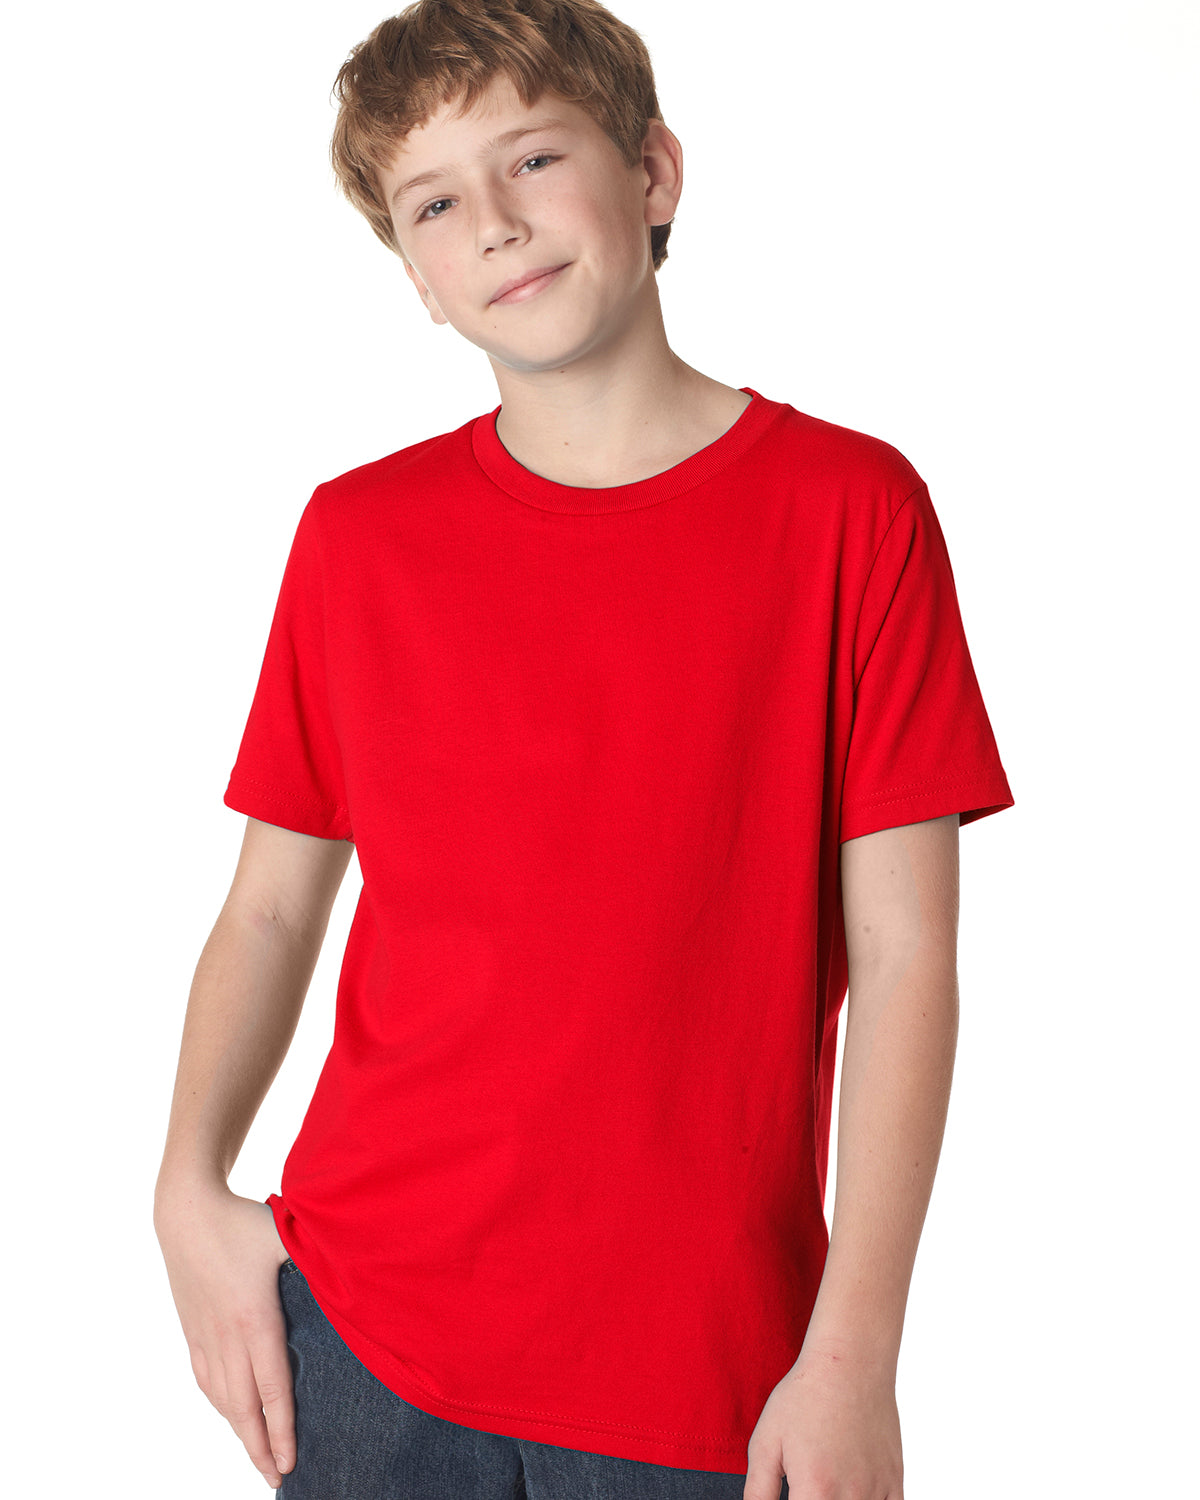 child model wearing next level youth tee in red